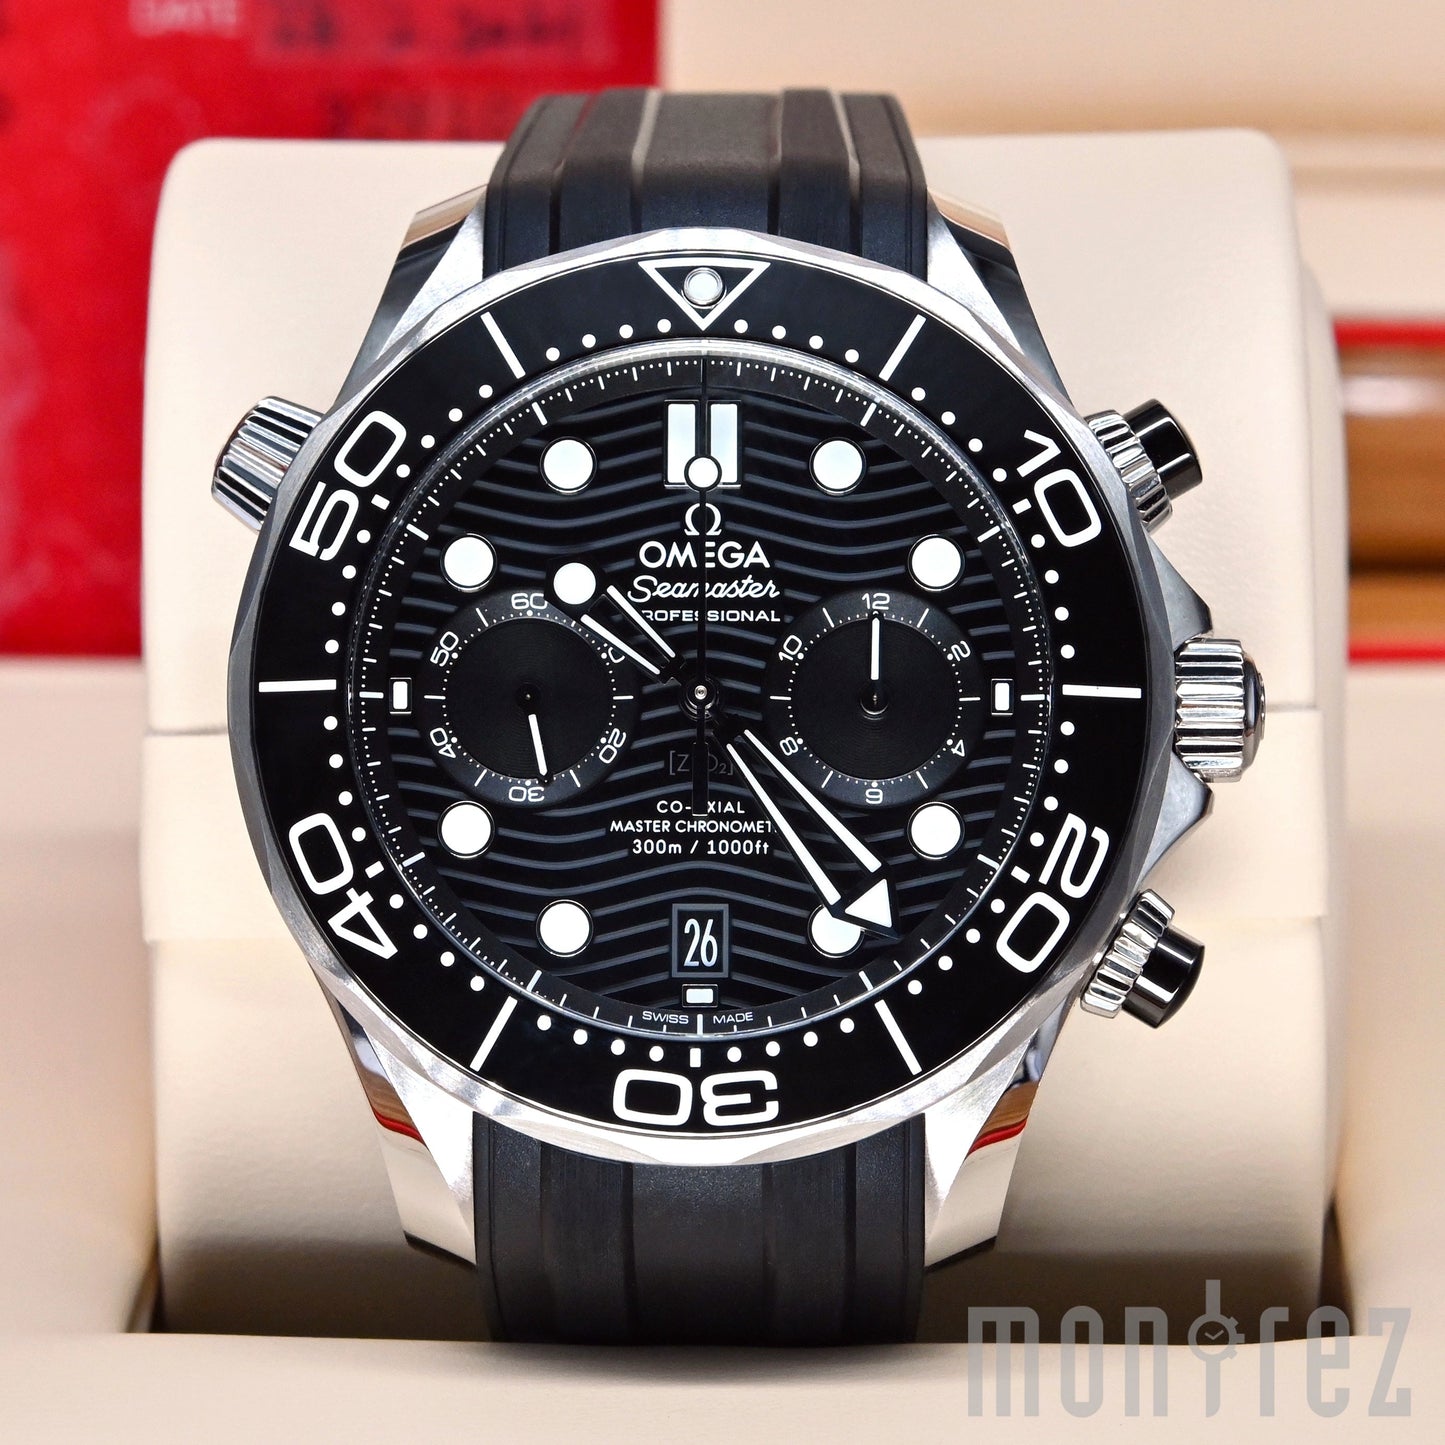 [Pre-Owned Watch] Omega Seamaster Diver 300m Co-Axial Master Chronometer Chronograph 44mm 210.32.44.51.01.001